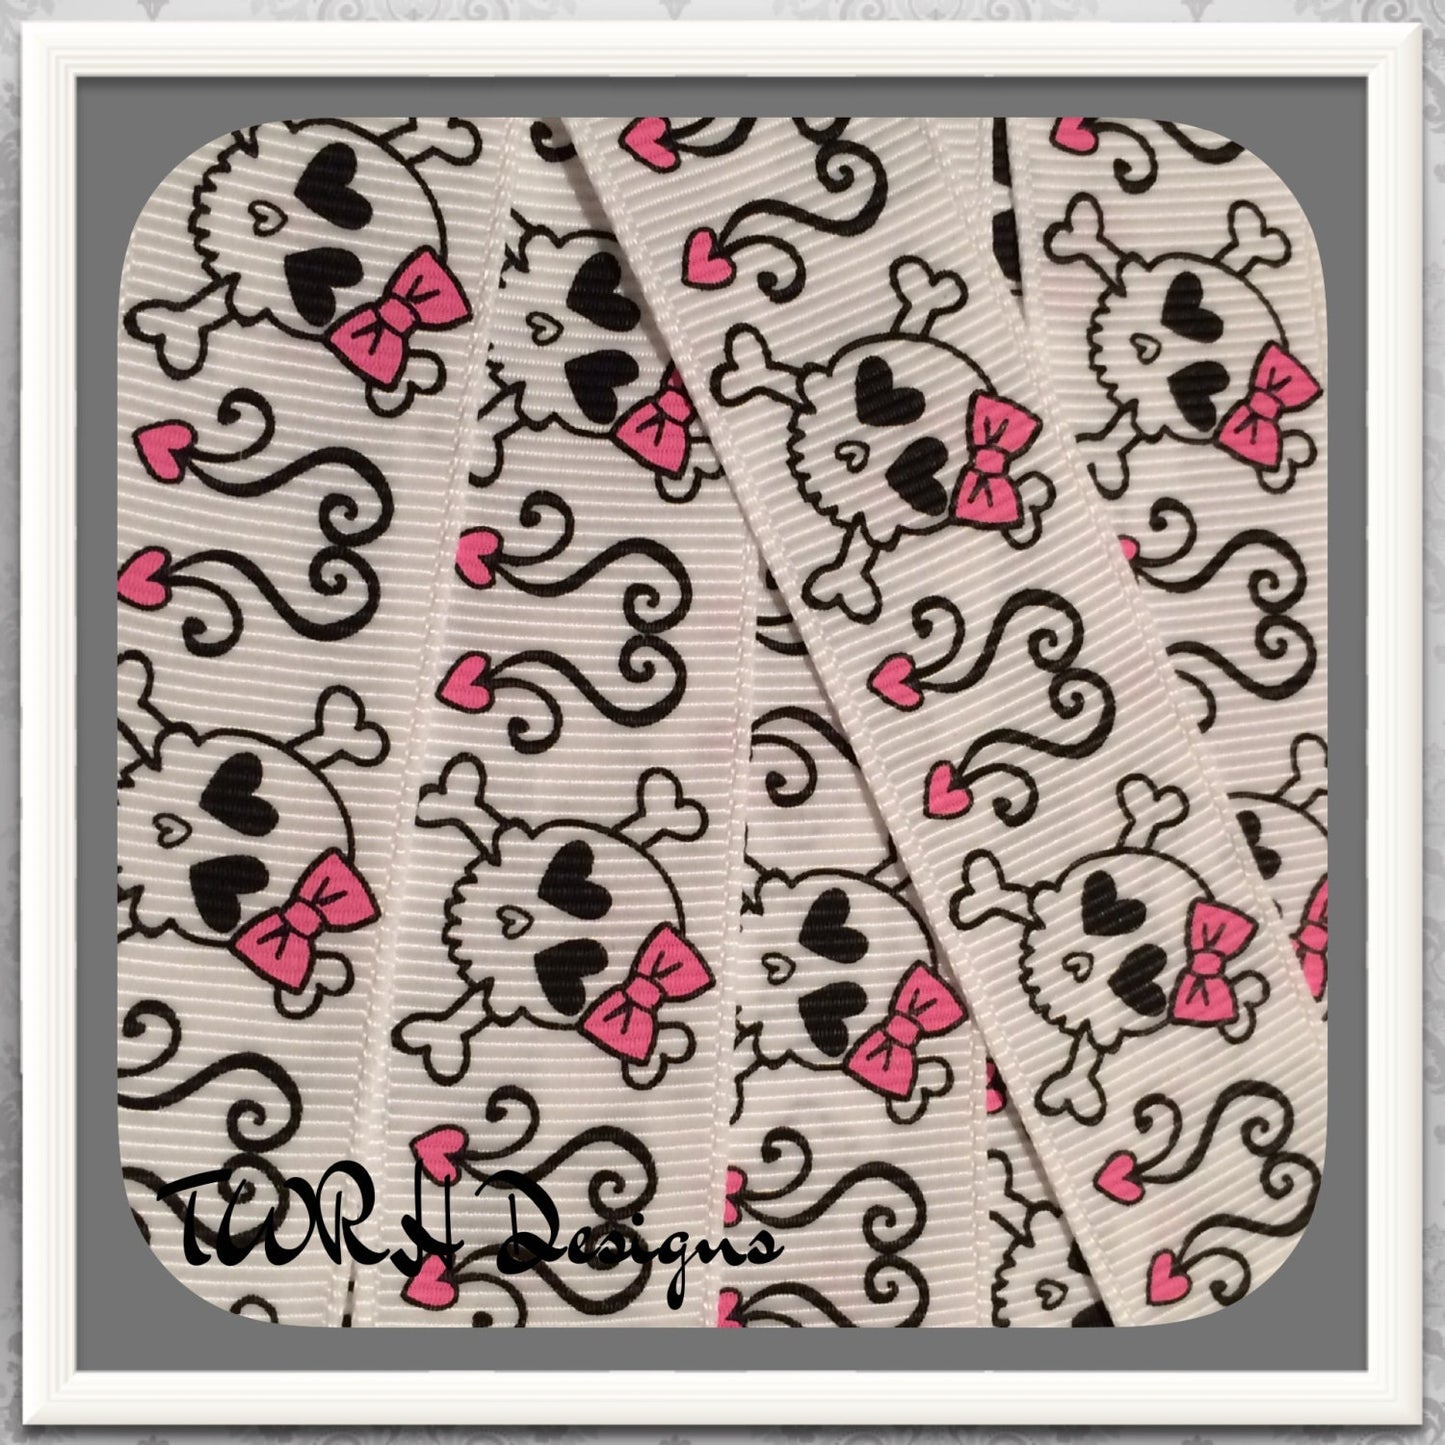 NEW: Skulls Hearts and Scrolls on white 7/8" grosgrain ribbon 2 Yards Hot Pink & Black- TWRH